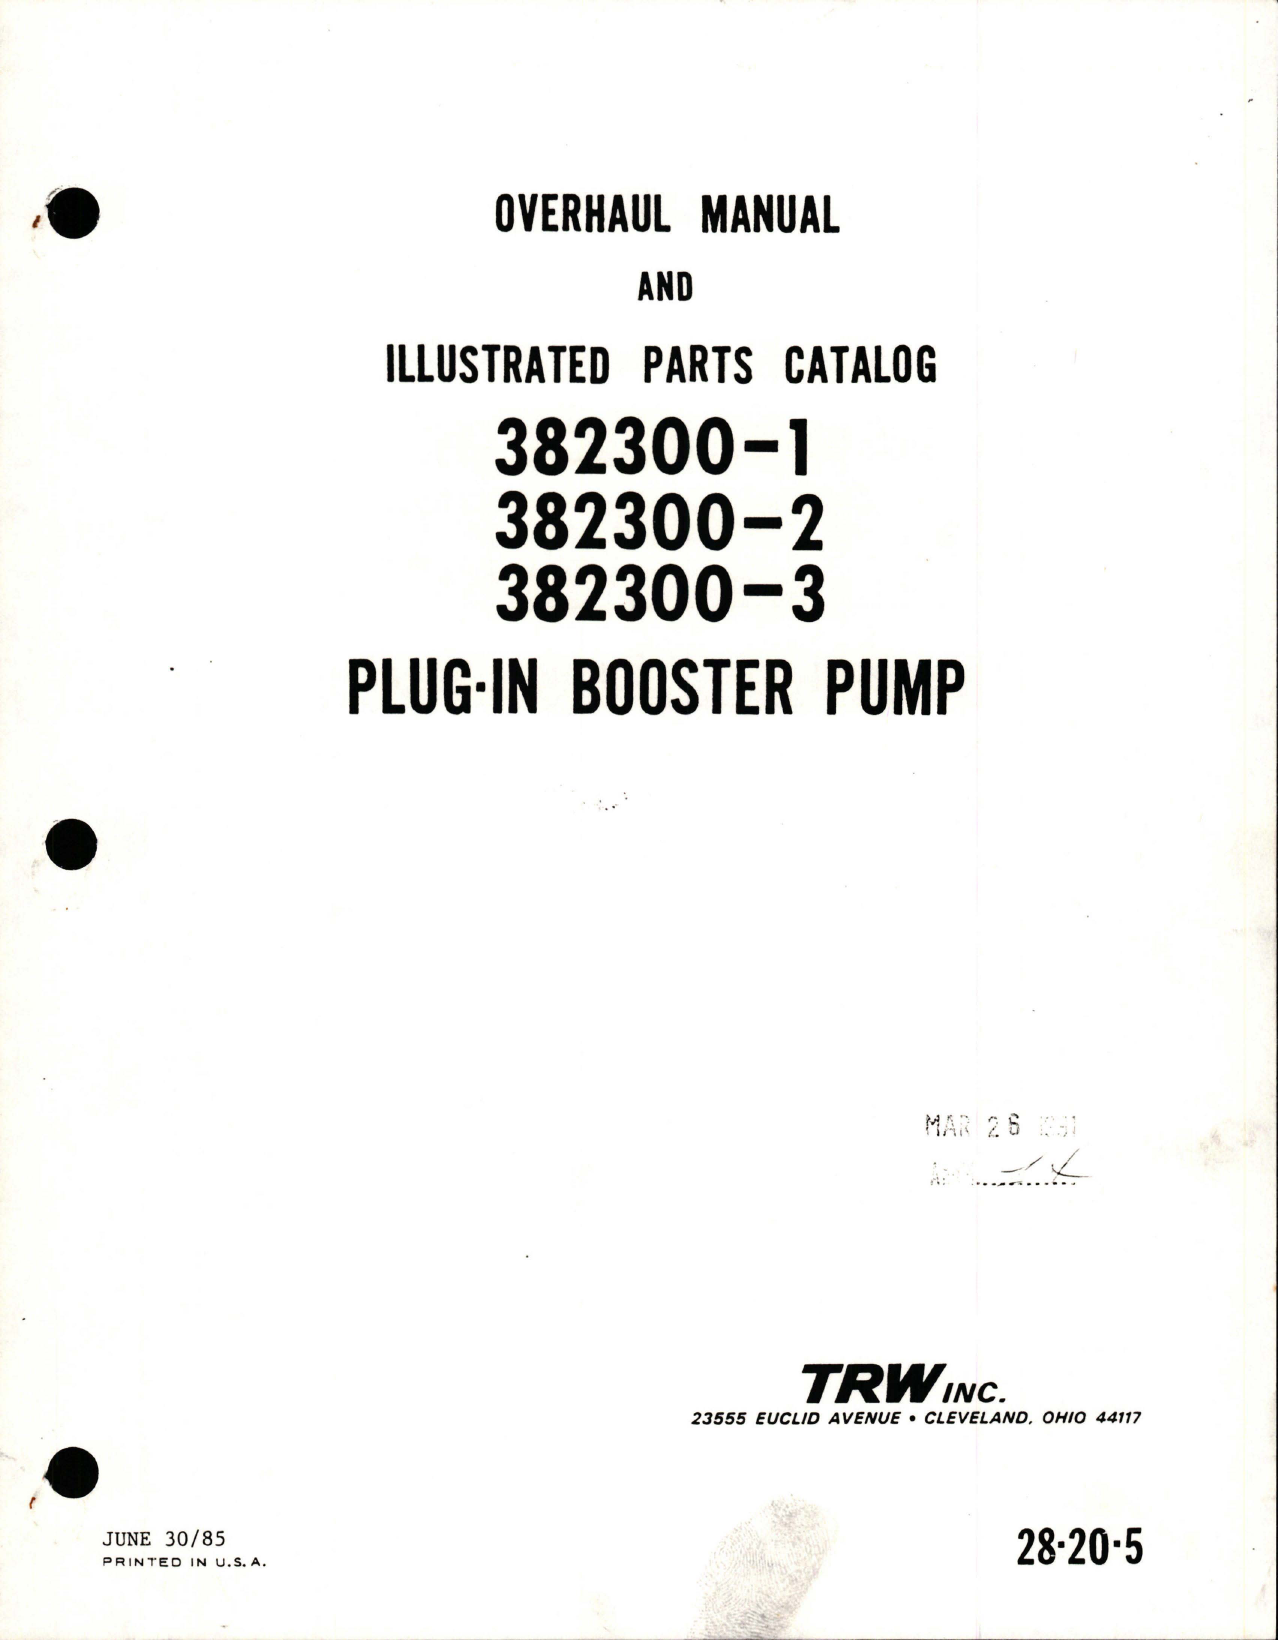 Sample page 1 from AirCorps Library document: Overhaul with Illustrated Parts Catalog for Plug-In Booster Pump - 382300-1, 382300-2, and 3823020-3 